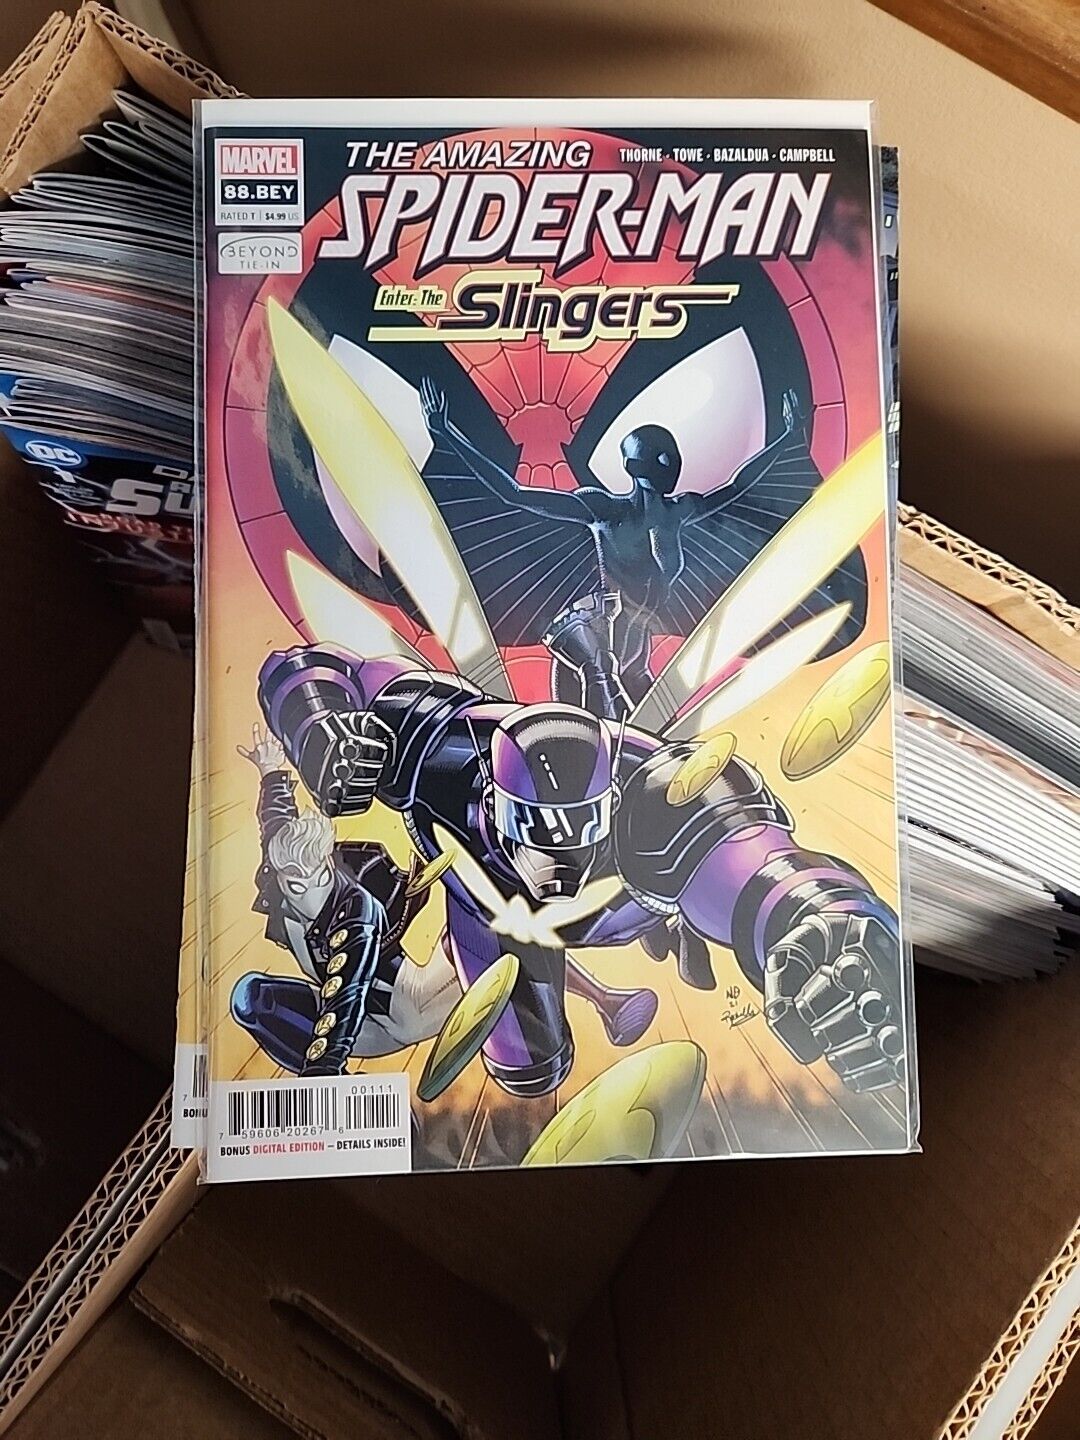 The Amazing Spider-man #88-#92 Legacy #889-#893